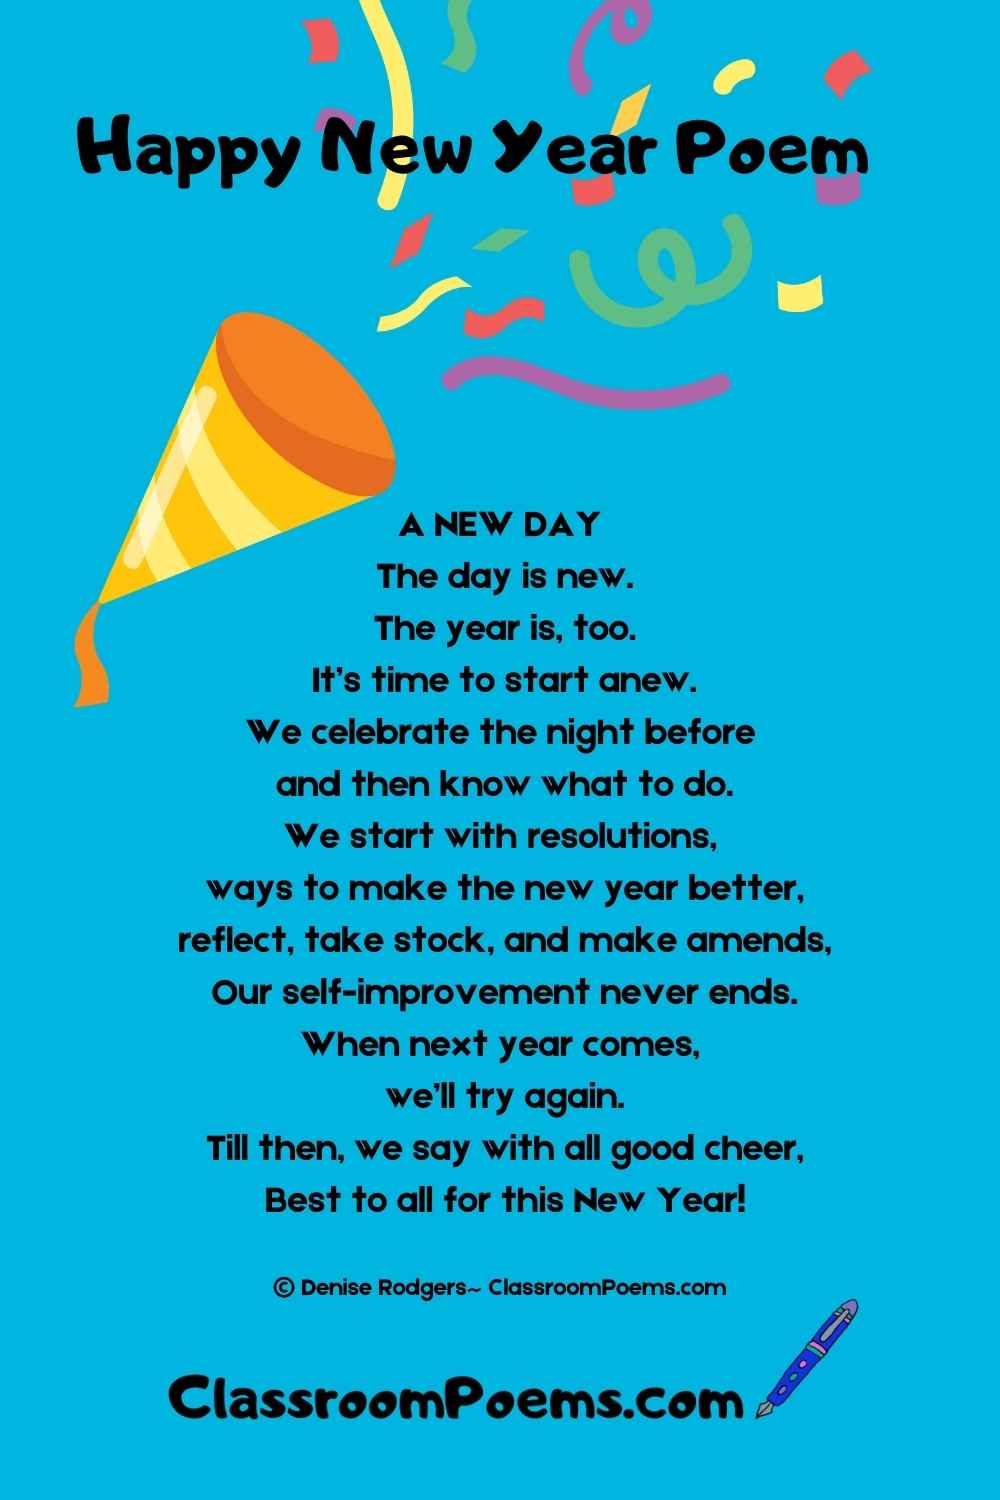 A Happy New Year poem by Denise Rodgers on ClassroomPoems.com.